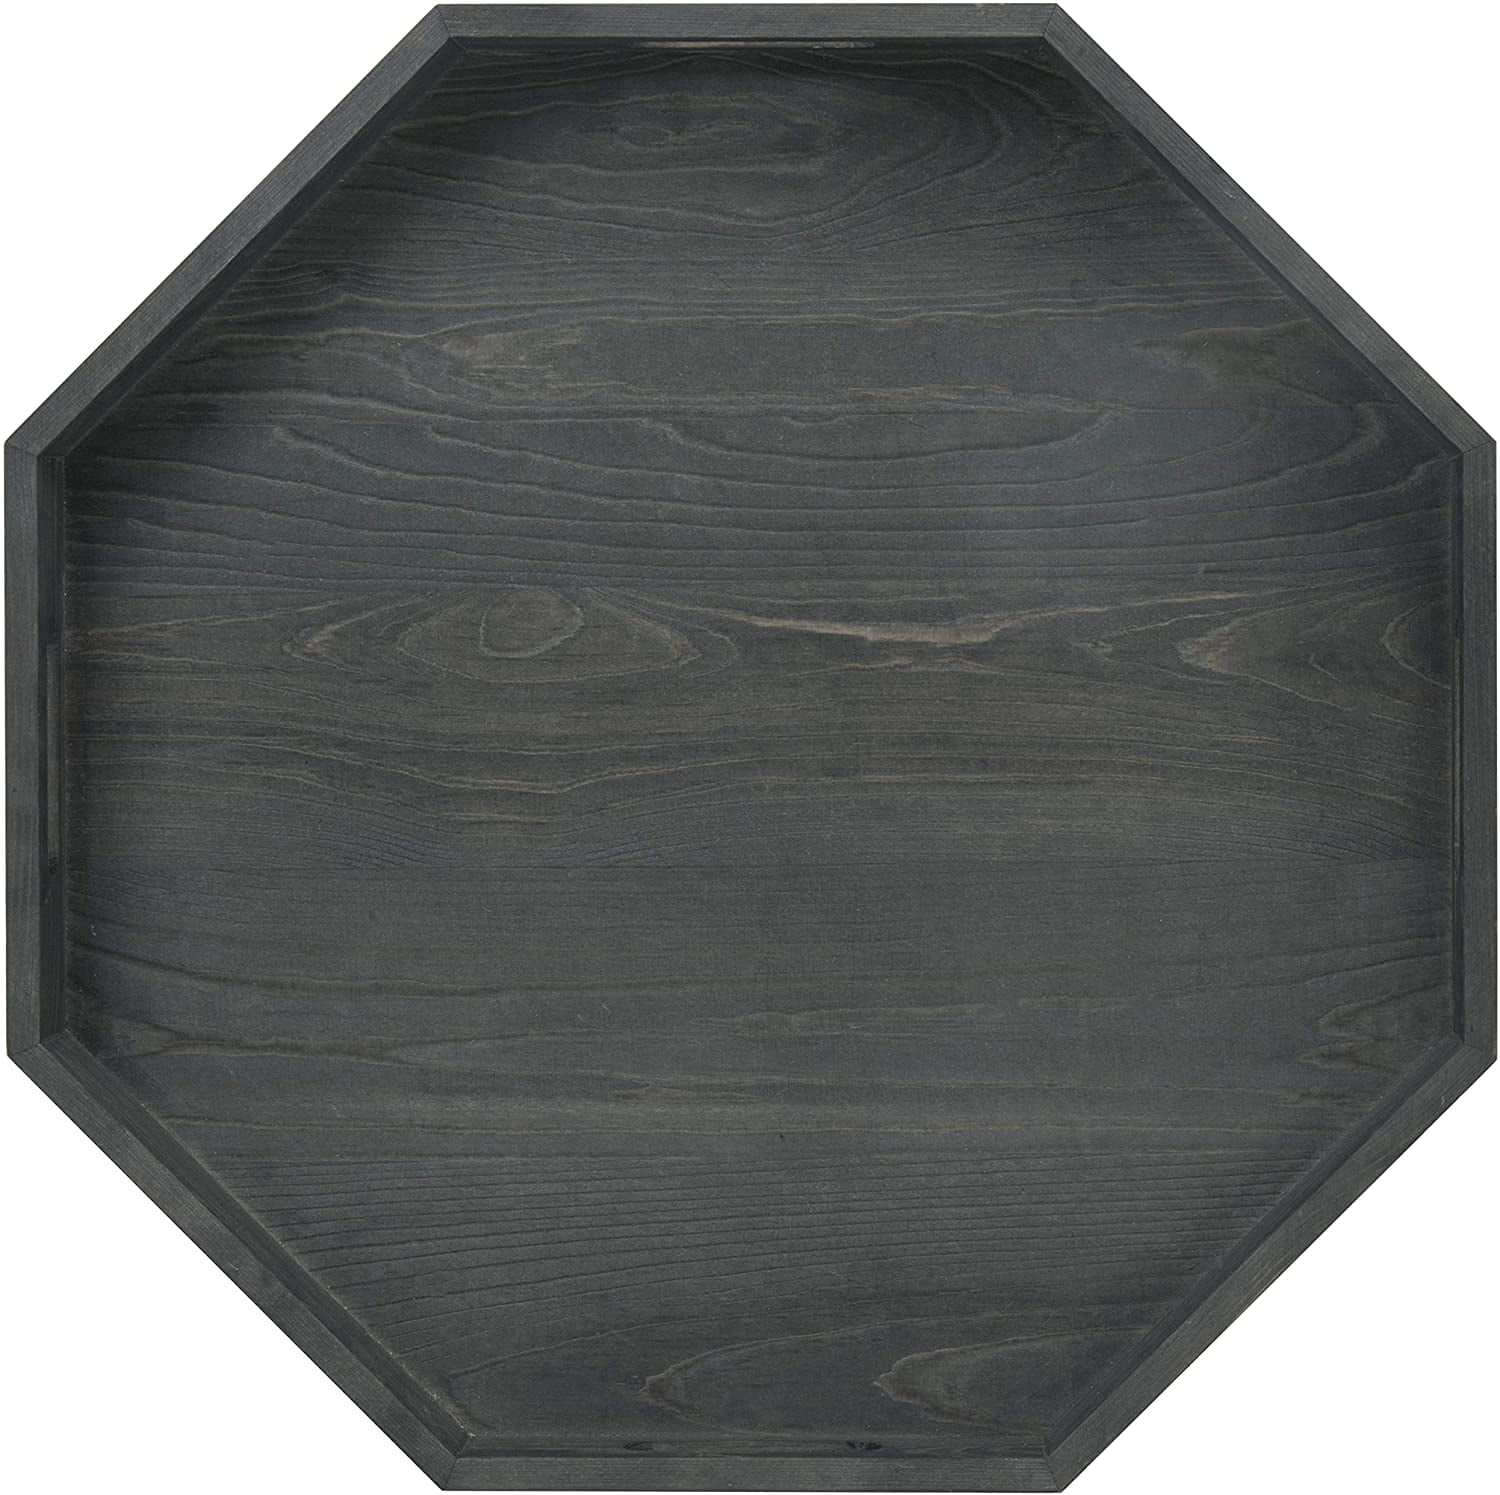 Details about   MyGift Rustic Burnt Gray Solid Wood Octagonal Vanity Organizer Tray with Handles 